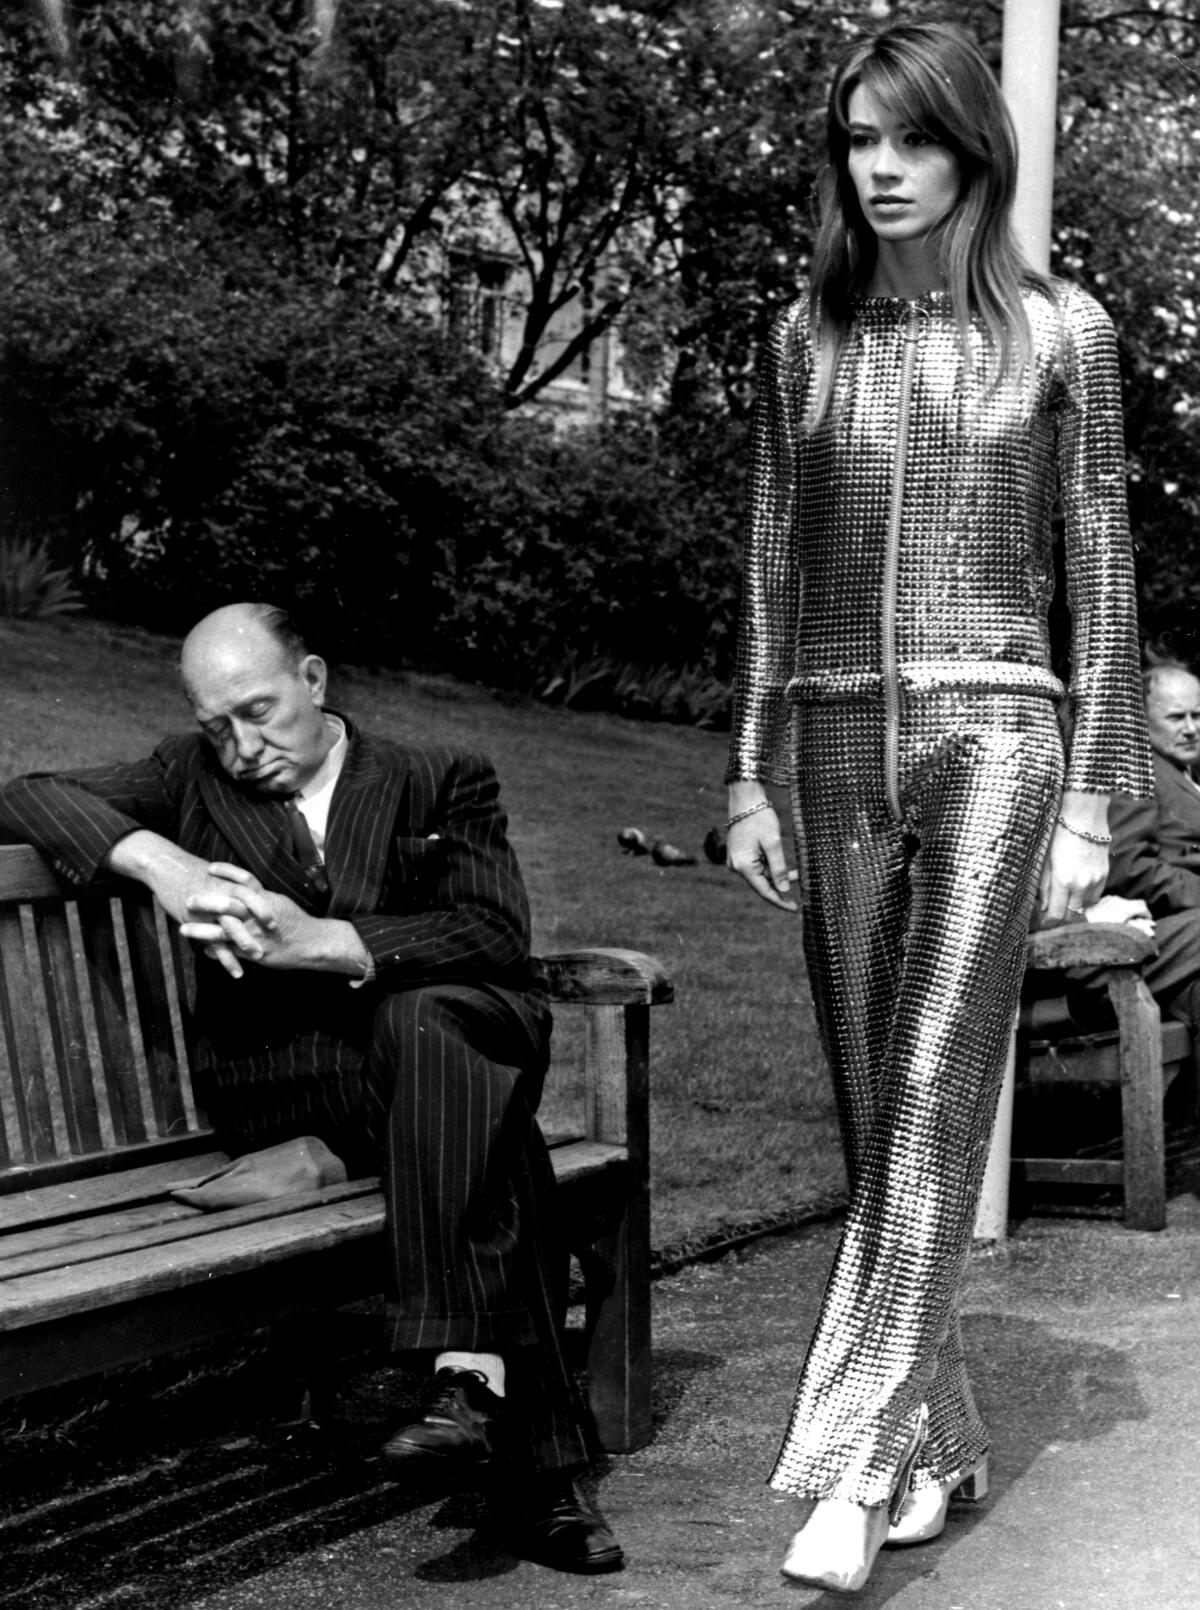 Francoise Hardy walks past a middle-aged man wearing a suit and pretending to be asleep on a park bench 